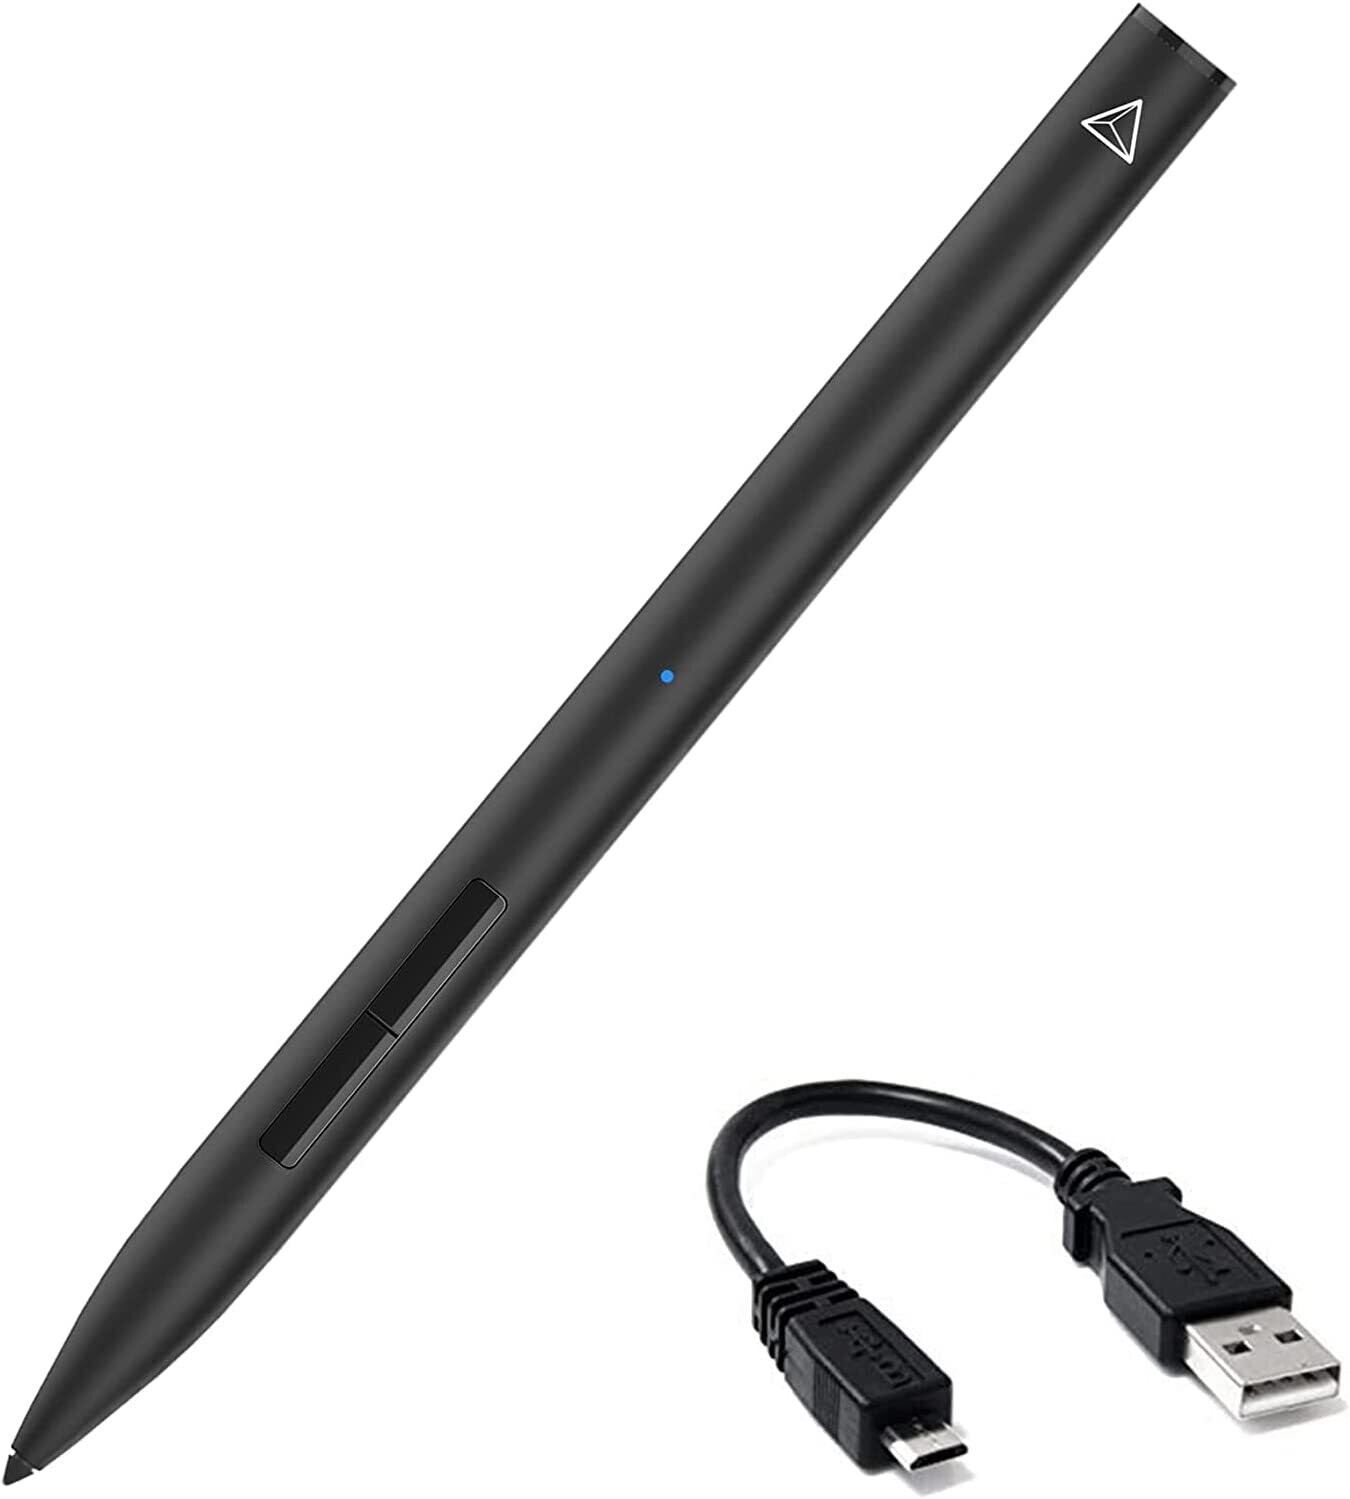 Adonit Note+, Stylus Pen for iPad